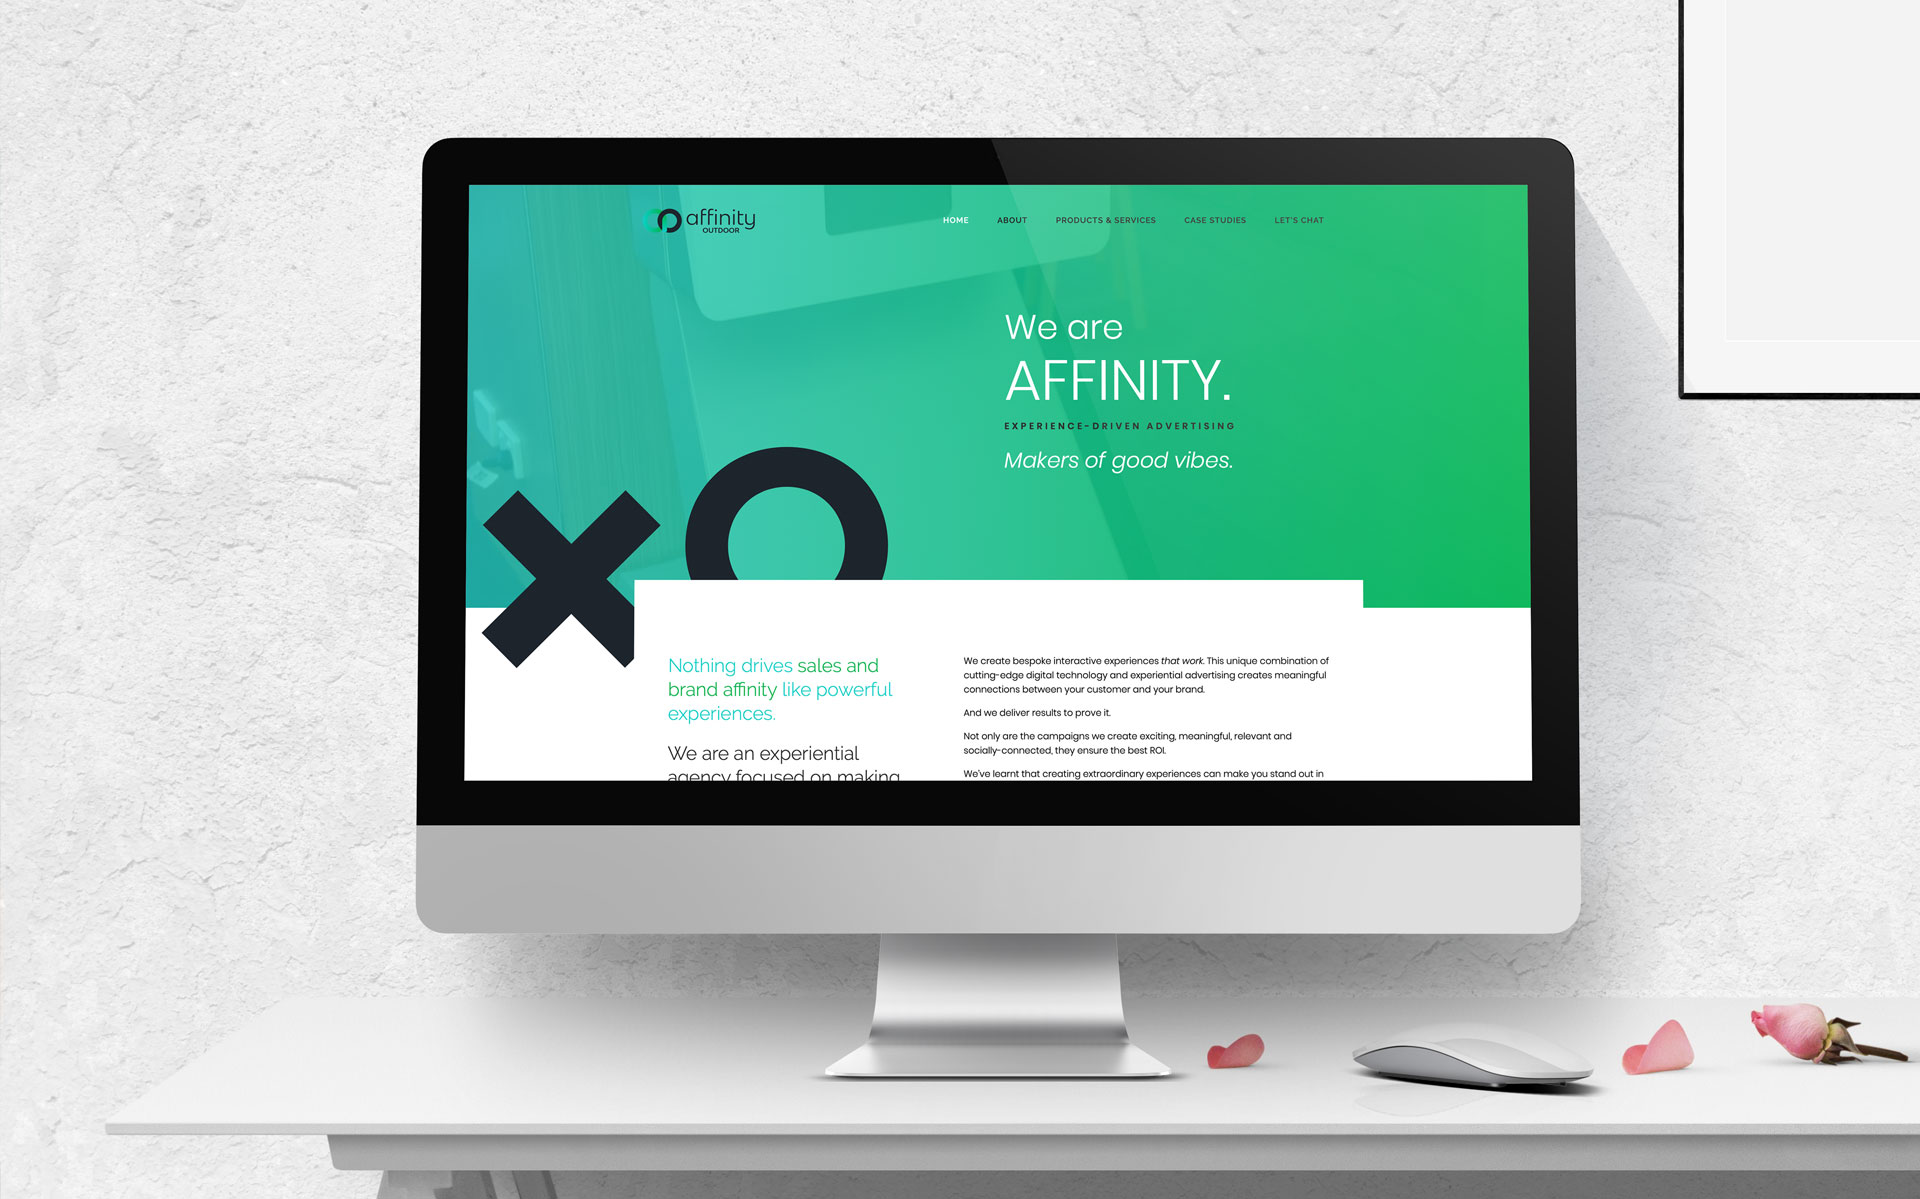 Affinity Outdoor logo, branding, powerpoint & website designed & built by Amy at Yellow Sunday